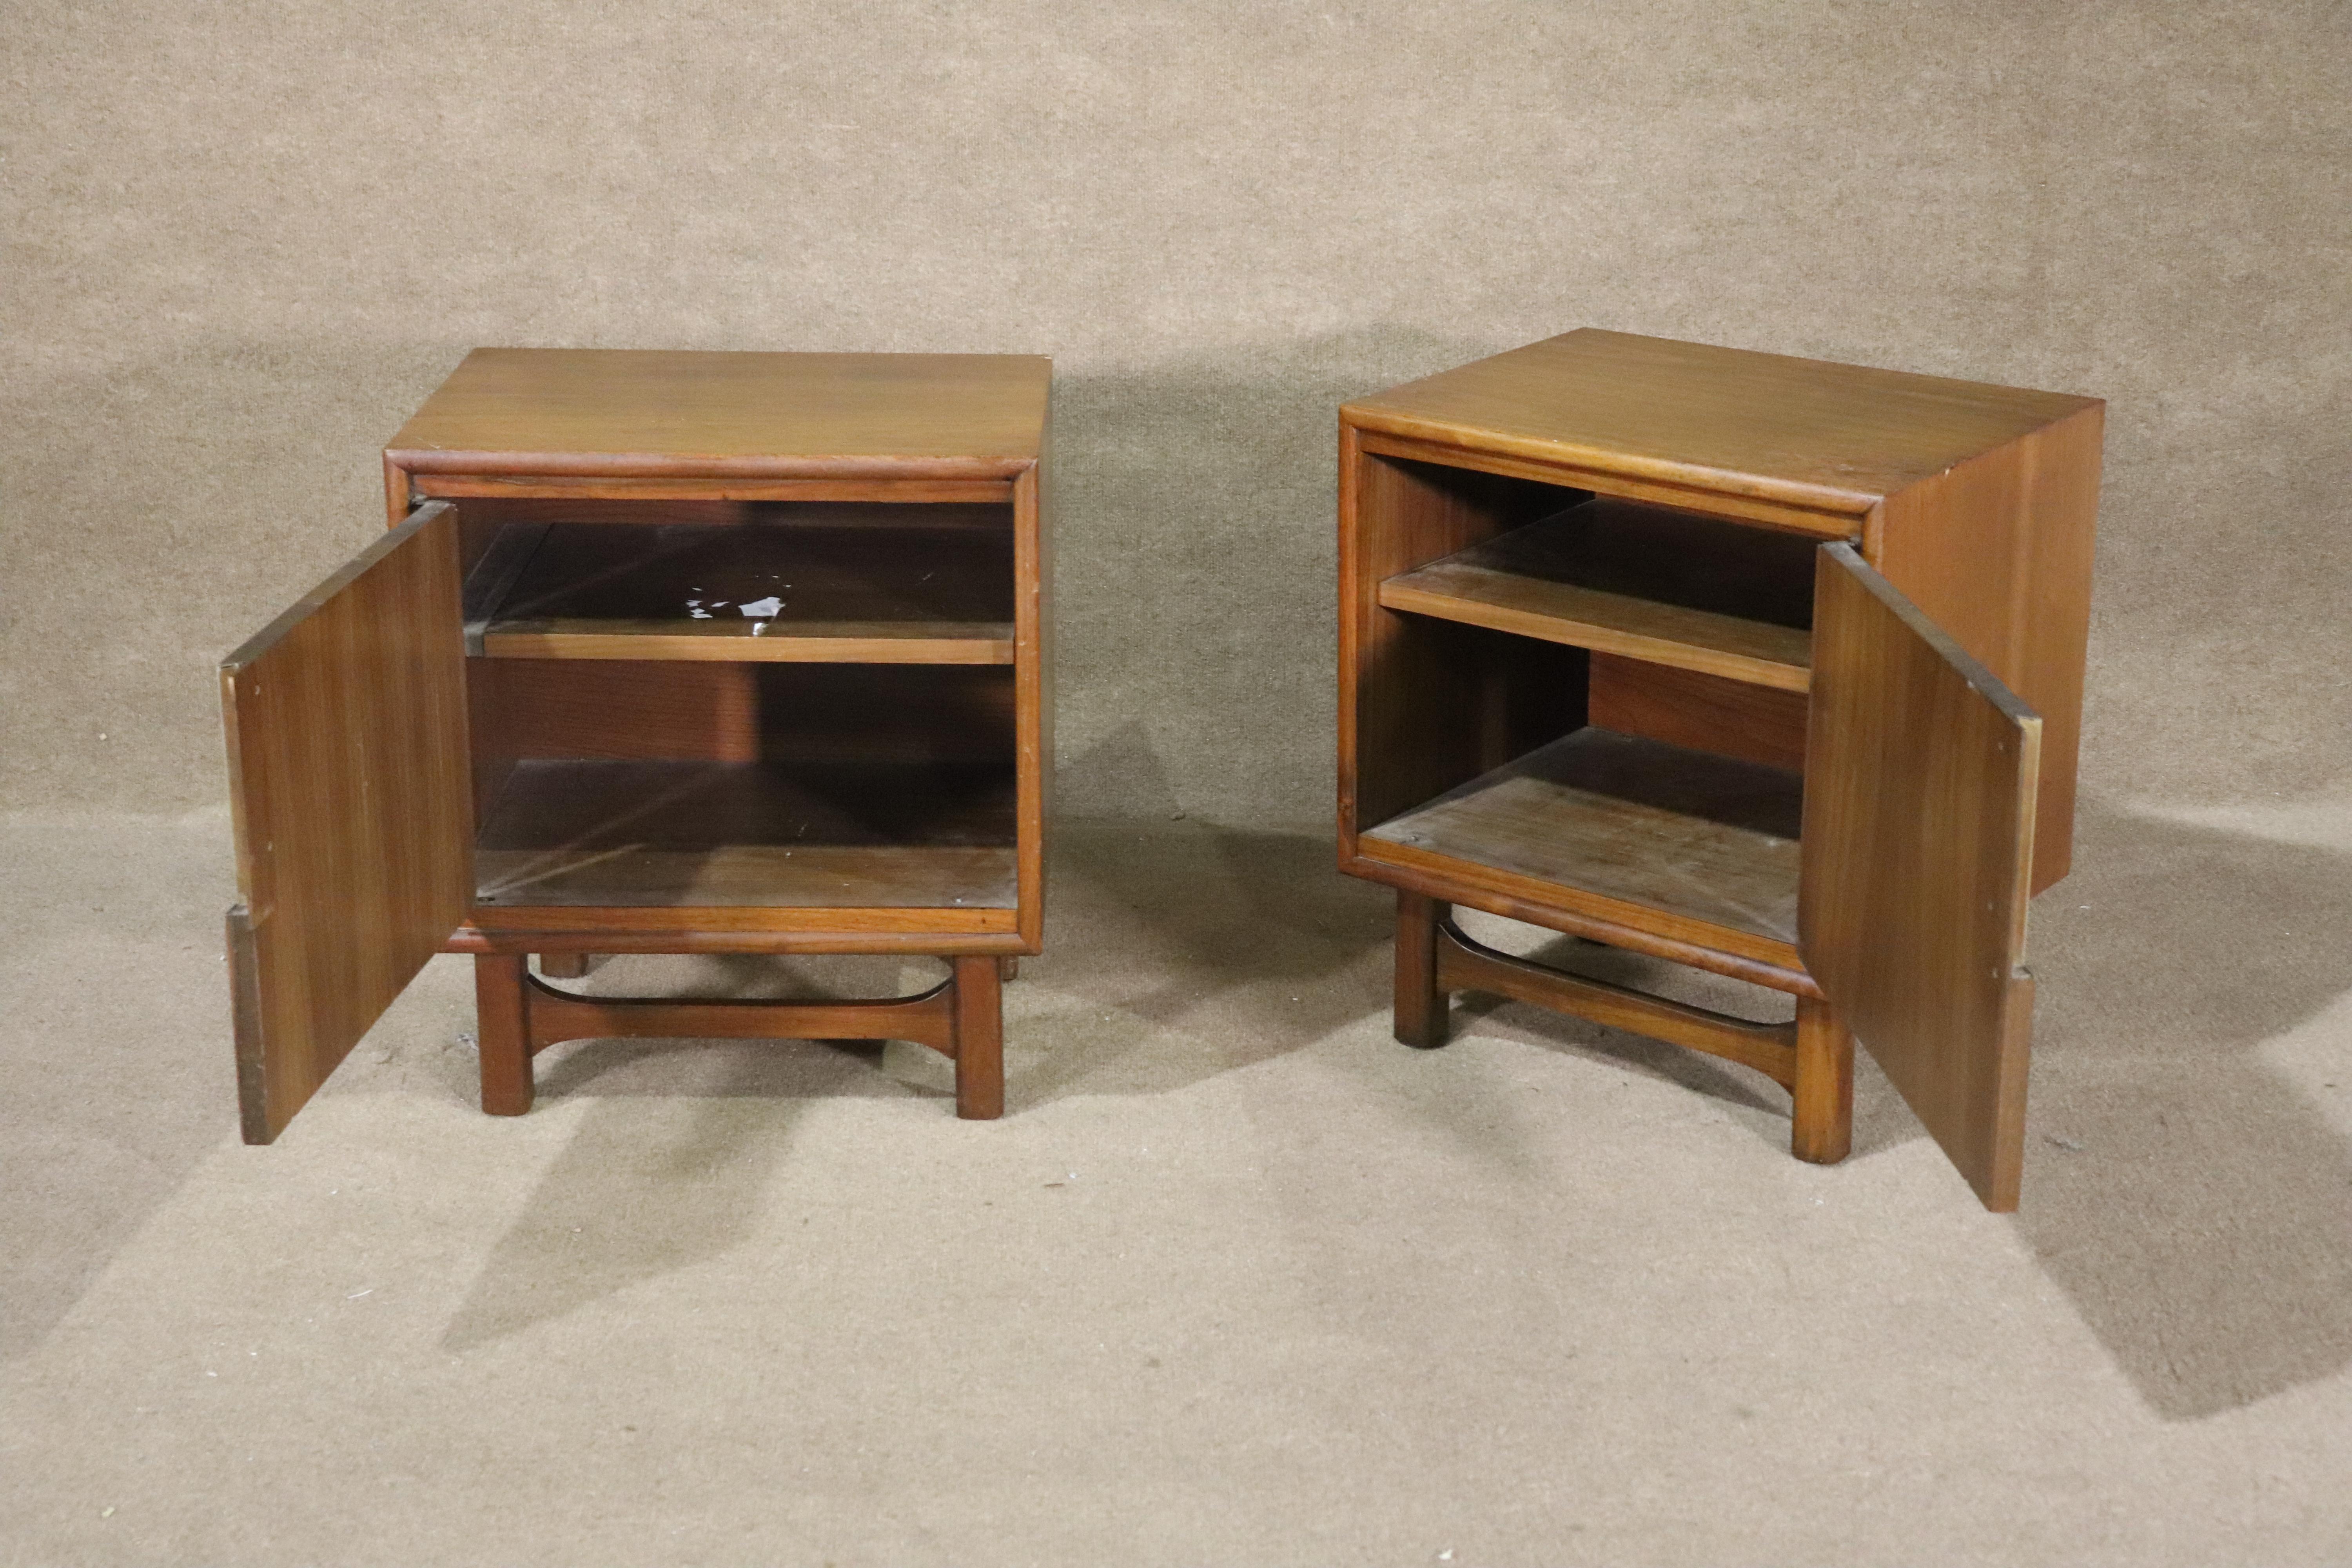 Pair of mid-century modern end tables with cabinet space. Walnut frames with metal door pulls.
Please confirm location NY or NJ